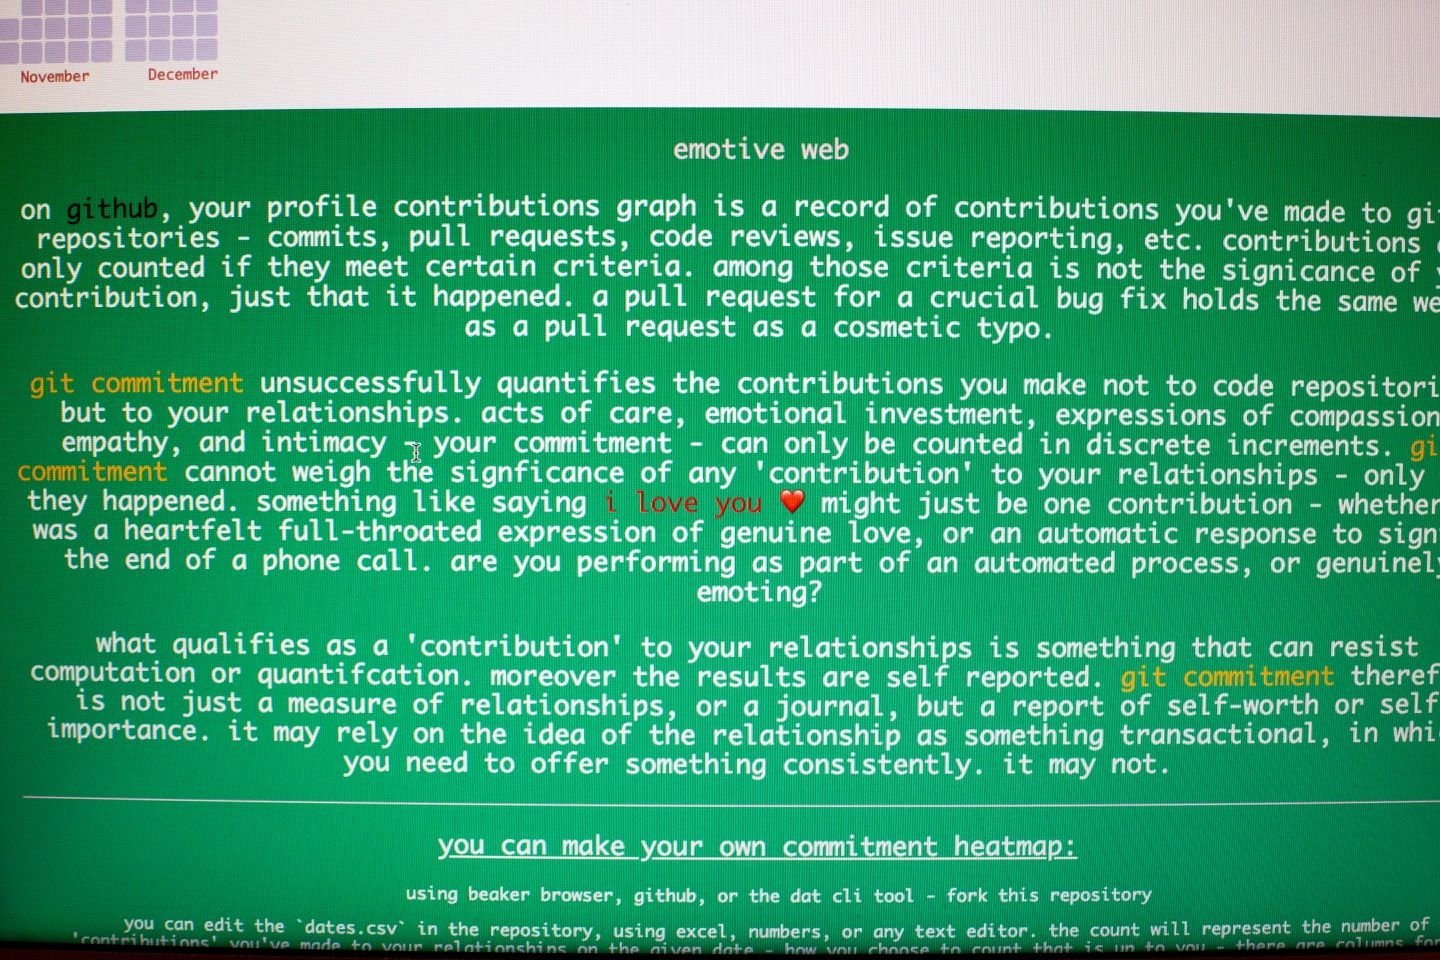 "A photograph of Jarret's git commitment page on a laptop screen. It reads: emotive web. on GitHub, your profile contributions graph is a record of contributions you’ve made to git repositories - commits, pull requests, code reviews, issue reporting, etc. contributions are only counted if they meet certain criteria. among these criteria is not the significance of your contribution, just that it happened. a pull request for a crucial bug fix holds the same weight as a pull request as a cosmetic typo. git commitment unsuccessfully quantifies the contributions you make not to code repositories but to your relationships. acts of care, emotional investment, expressions of compassion, empathy, and intimacy - your commitment - can only be counted in discrete increments. git commitment unsuccessfully quantifies the contributions you make not to code repositories but to you relationships. acts, emotional investment, expressions of compassion, empathy, and intimacy - your -commitment - can only be counted in discrete increments. git commitment cannot weigh the significance of any ‘contribution’ to you relationships - only they happened. something like saying i love you might just be one contribution - whether it was a heartfelt full-throated expression of genuine love, or an automated response to signal the end of a phone call. are you performing as part of an automated process, or genuinely emoting? what qualifies as a ‘contribution’ to your relationships is something that can resist computation or quantification. moreover the results are self reported. git commitment therefore is not just a measure of relationships, or a journal, but a report of self-worth or self-importance. it may rely on the idea of the relationship as something transactional, in which you need to offer something consistently. it may not. you can make your own commitment heat map: using beaker, GitHub or the dat cli tool - fork this repository. you can edit the ‘dates.csv’ int he repository, suing excel, numbers or any text editor, the count will represent the number of…"